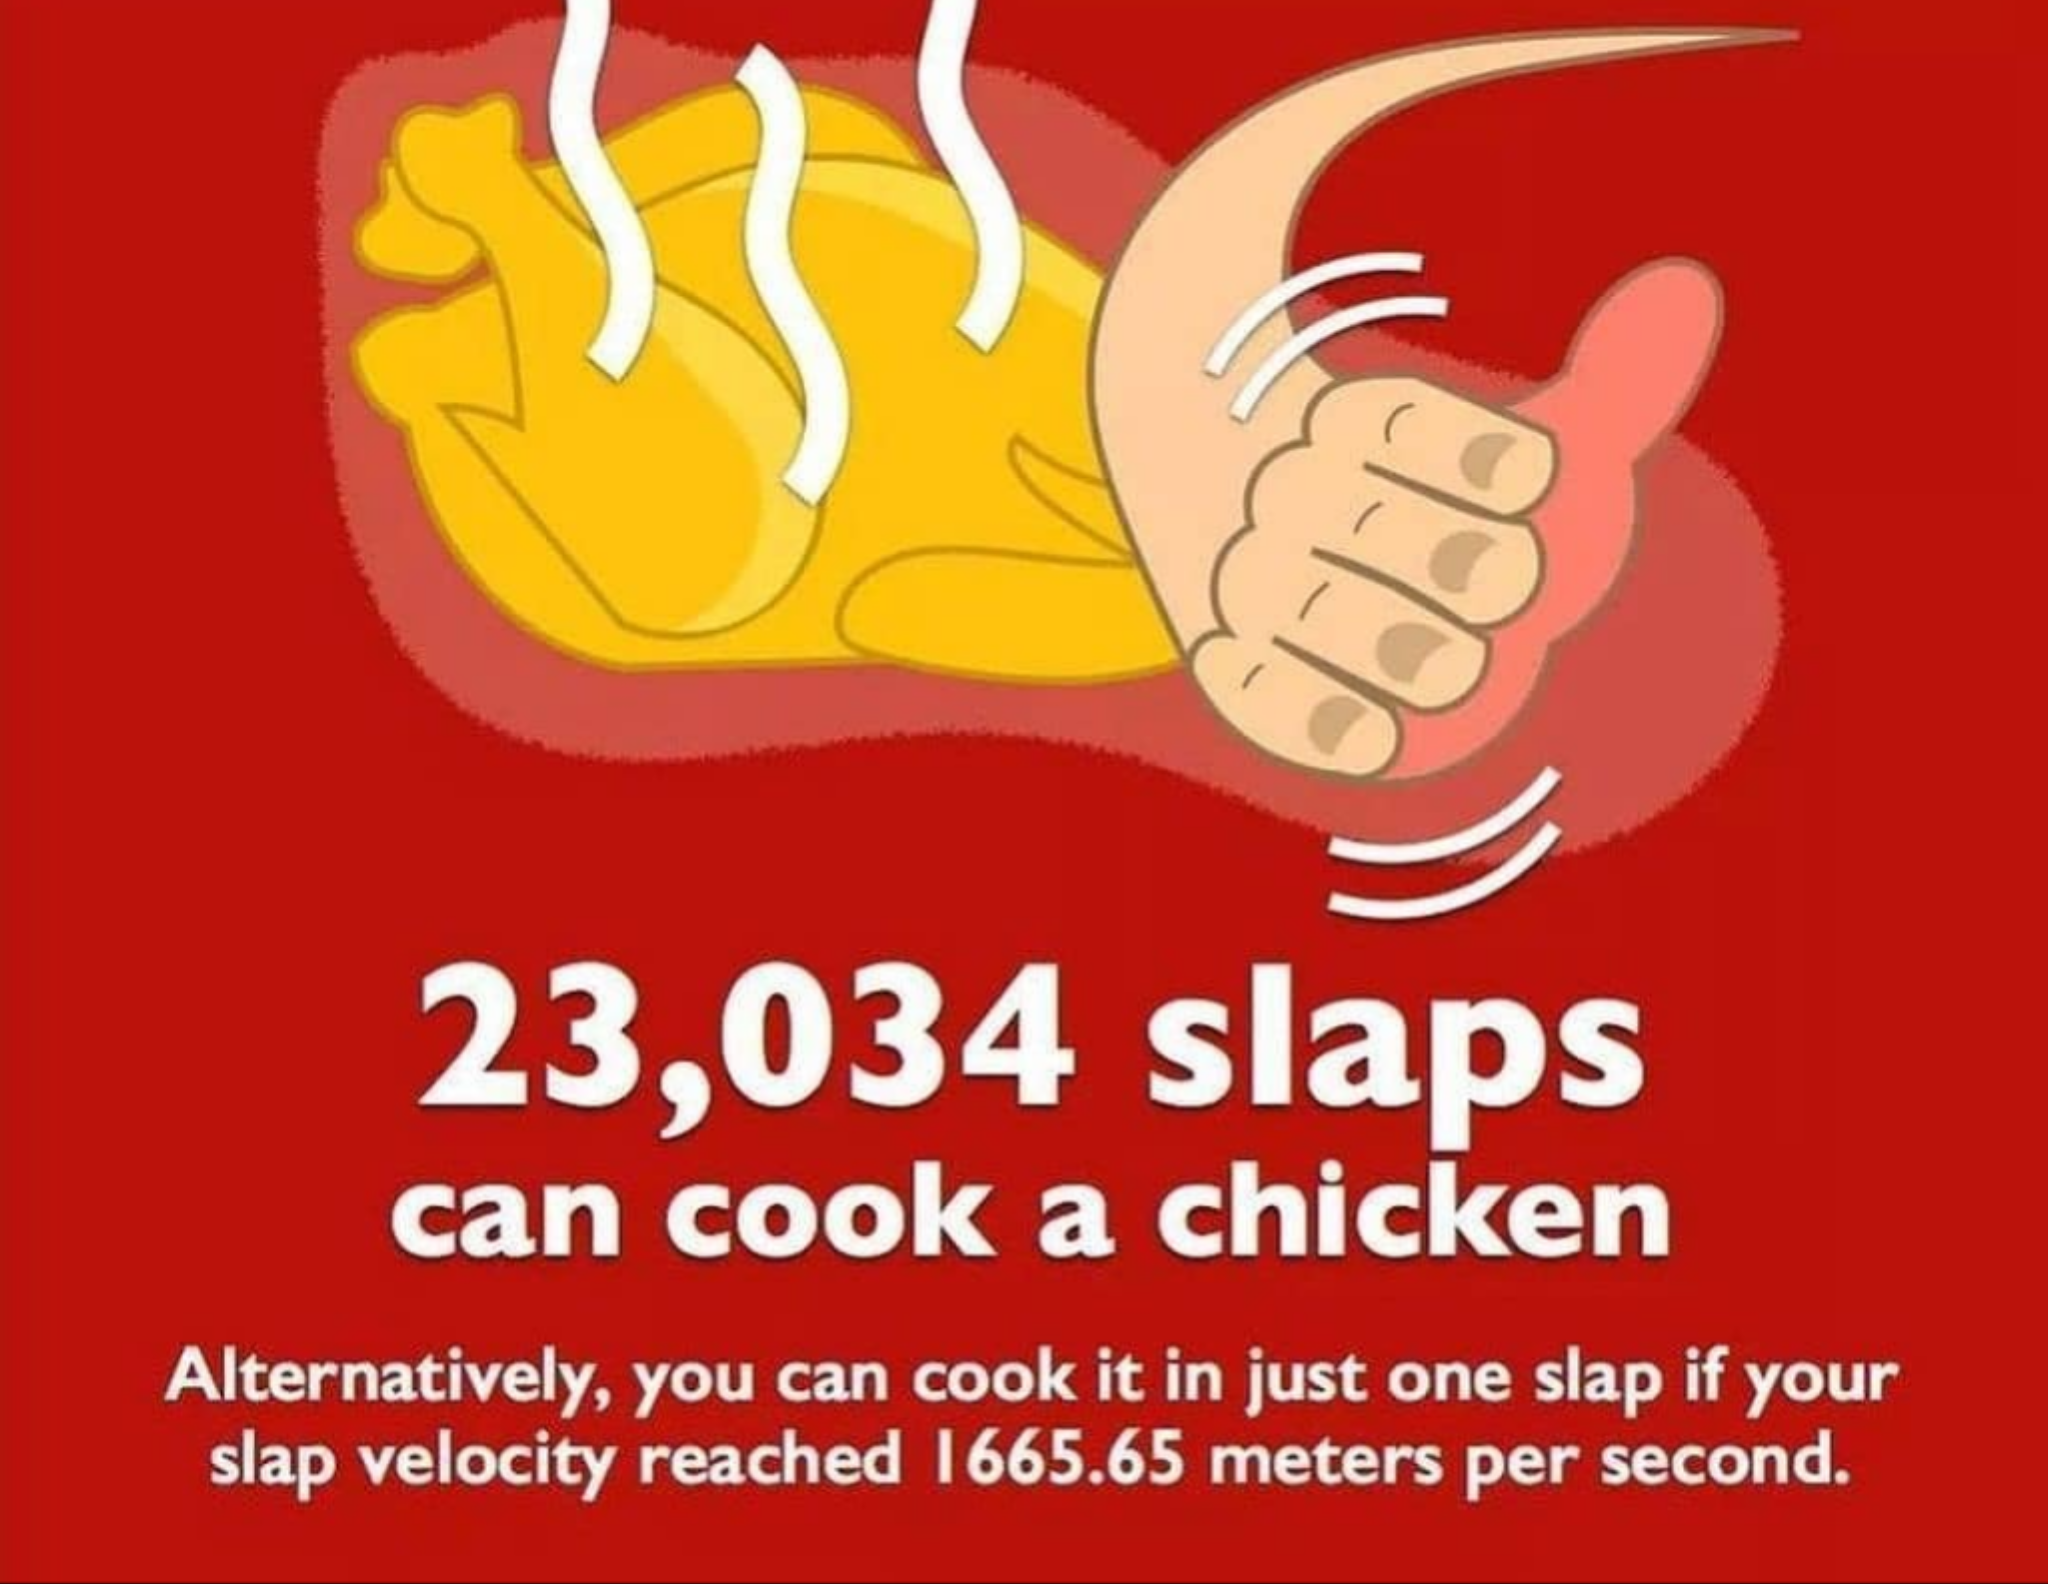 Why did the chicken got slapped?